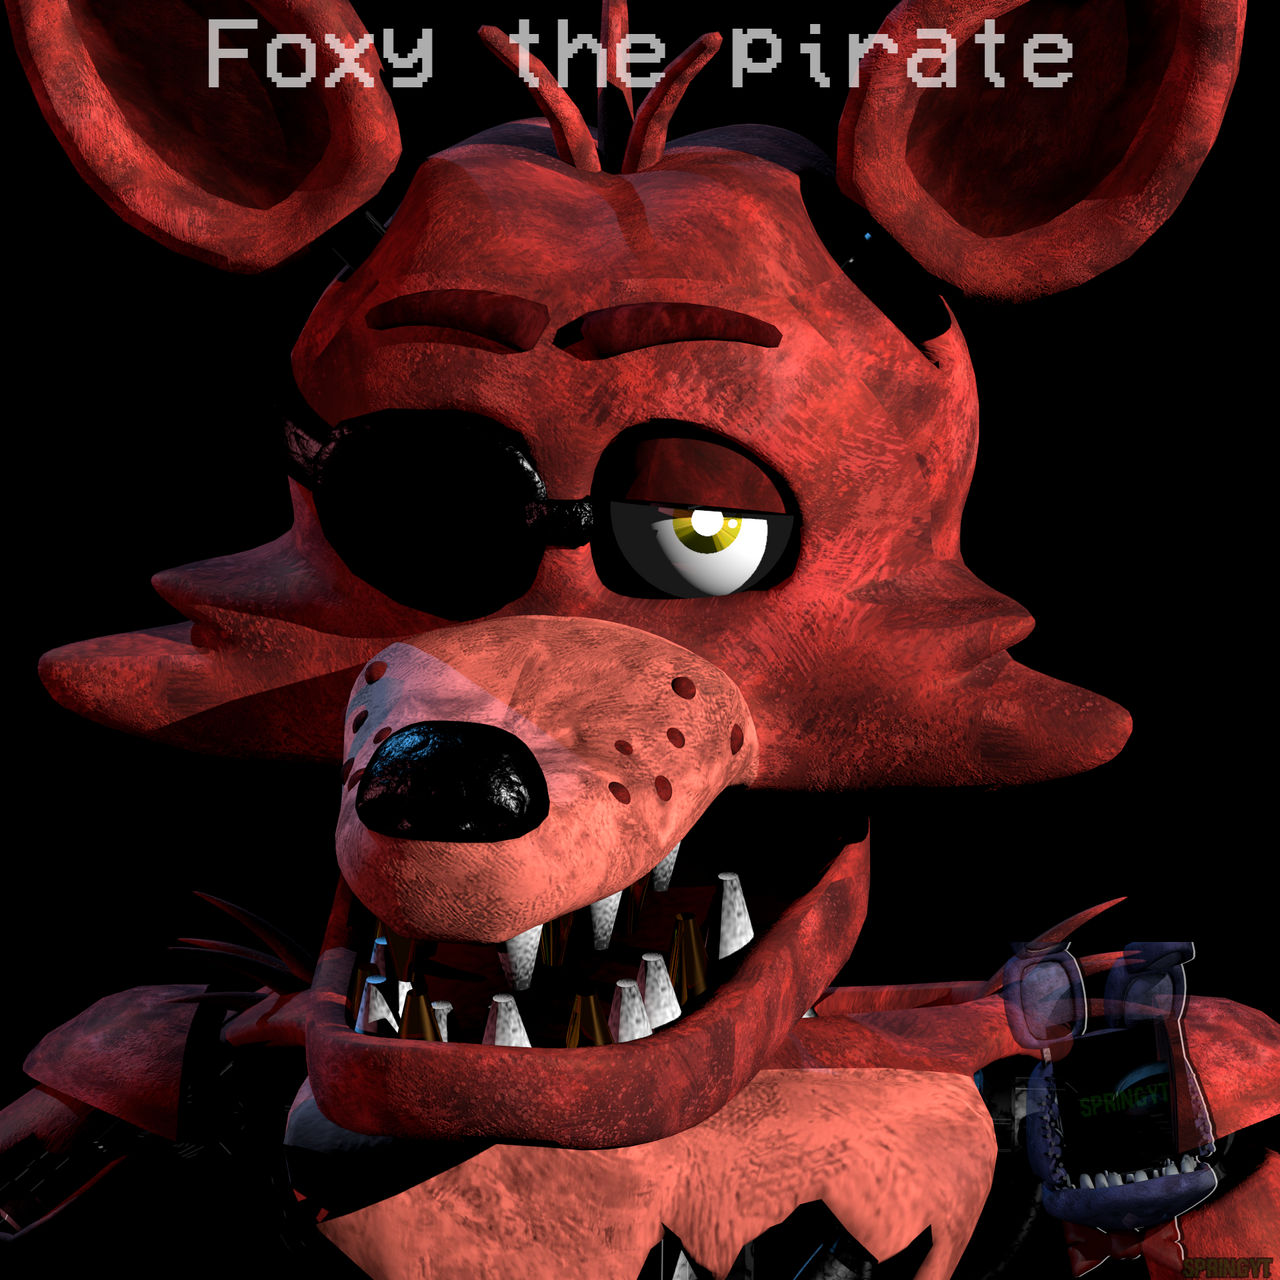 Five nights at freddy's 1 by springyt on DeviantArt